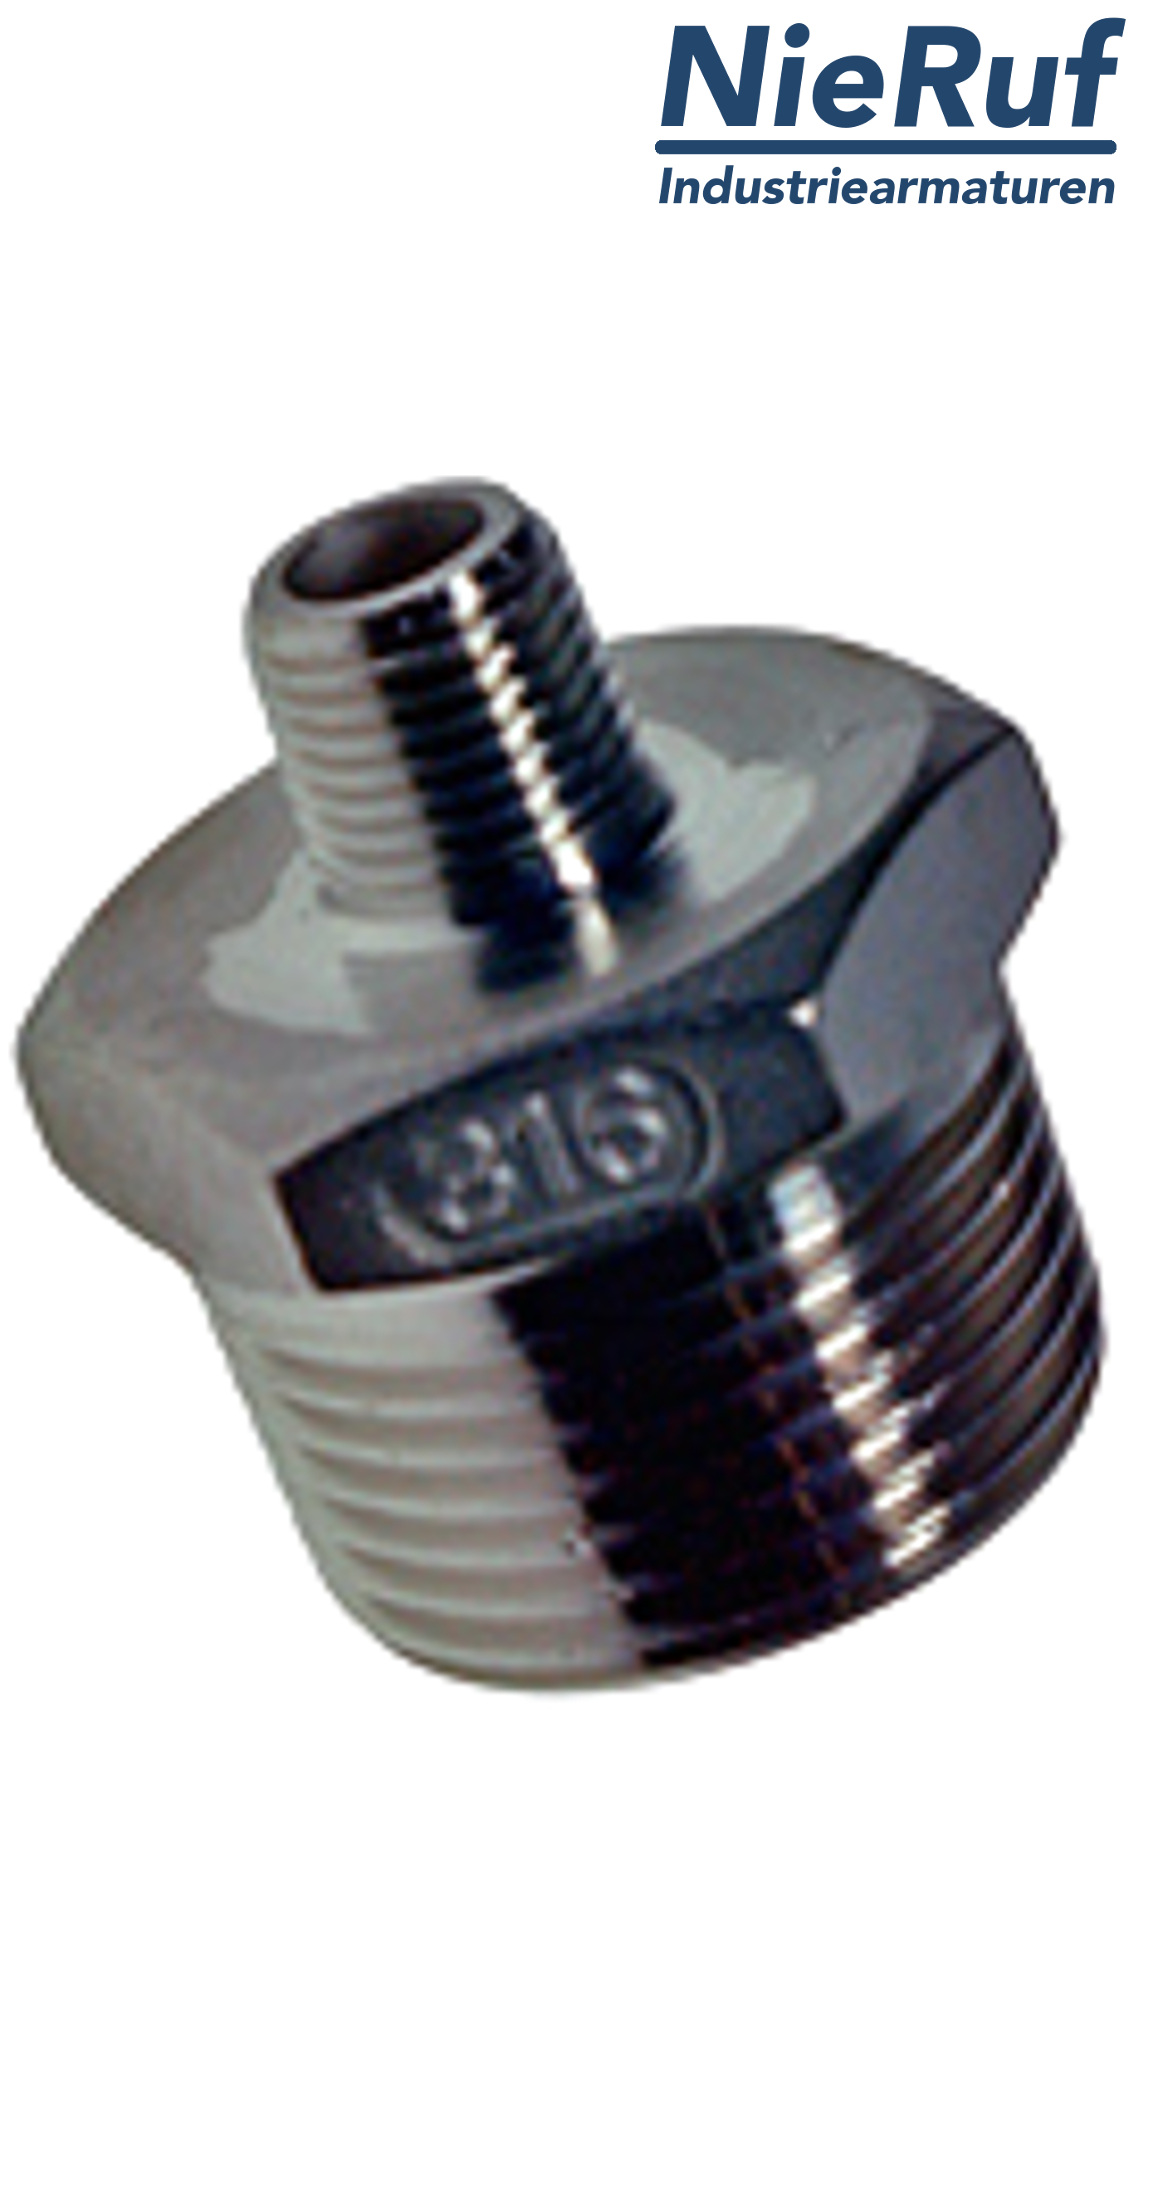 reducing nipple 1" x 3/4" inch NPT male stainless steel 316L